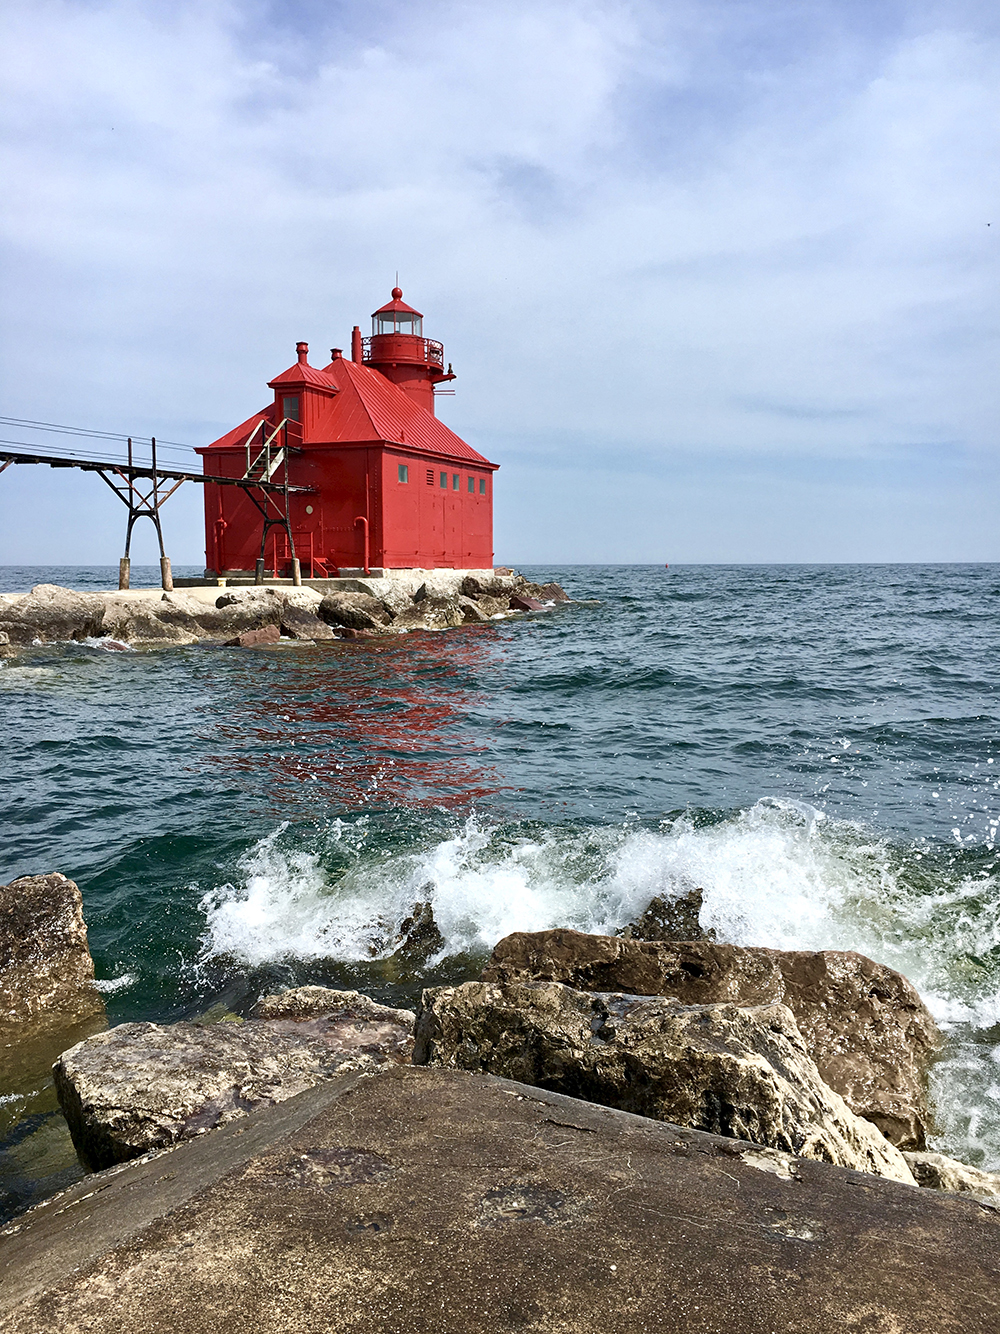 Red lighthouse in Sturgeon Bay.